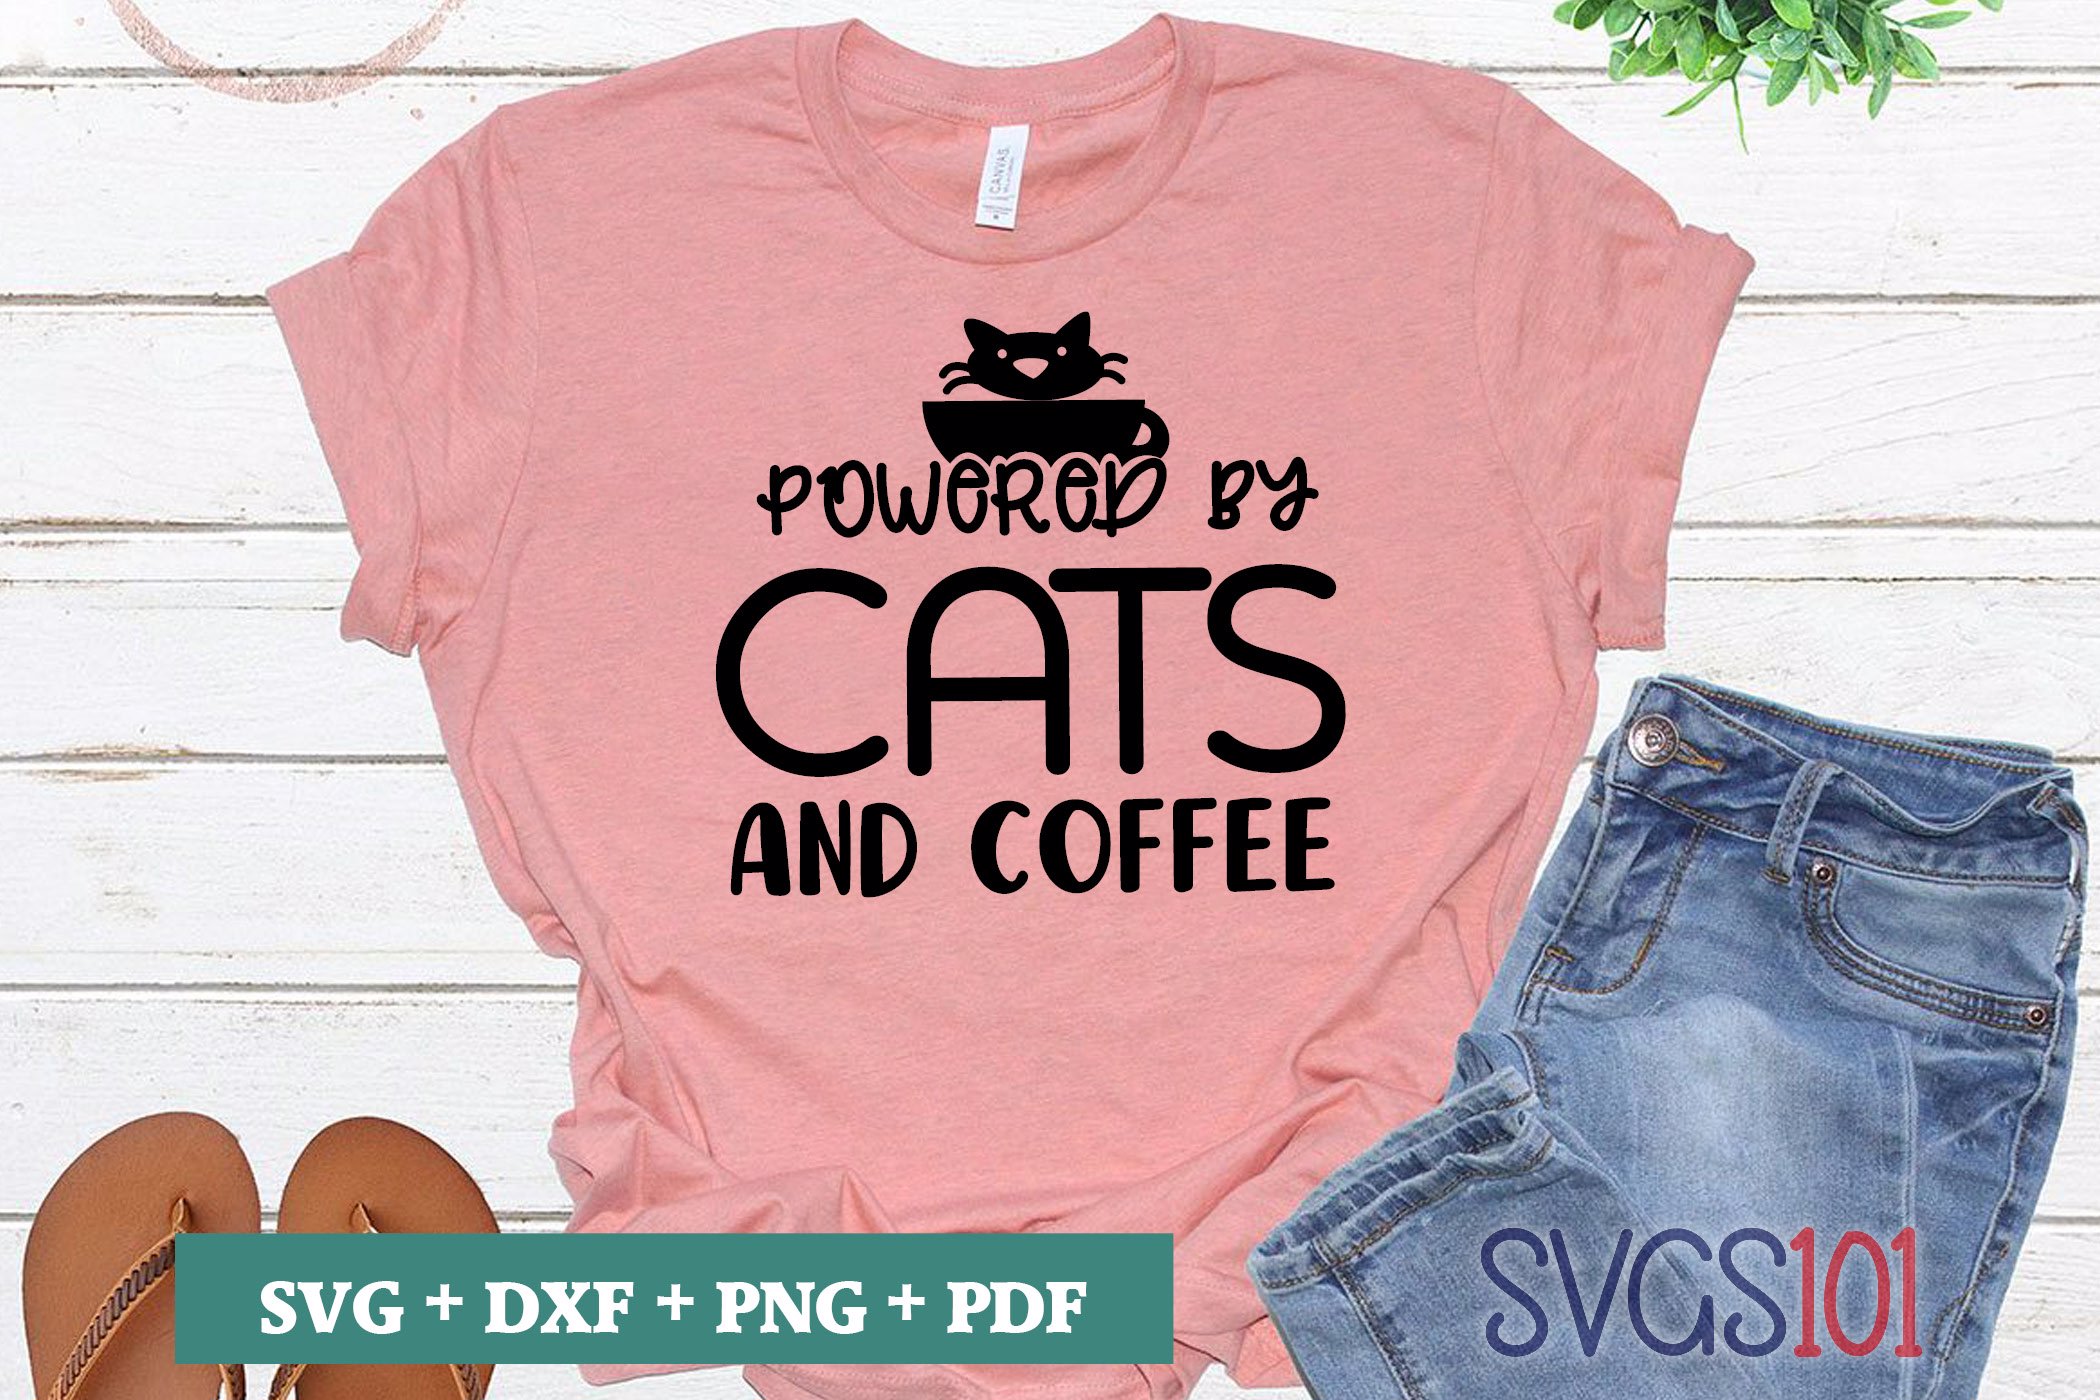 Powered By Cats and Coffee